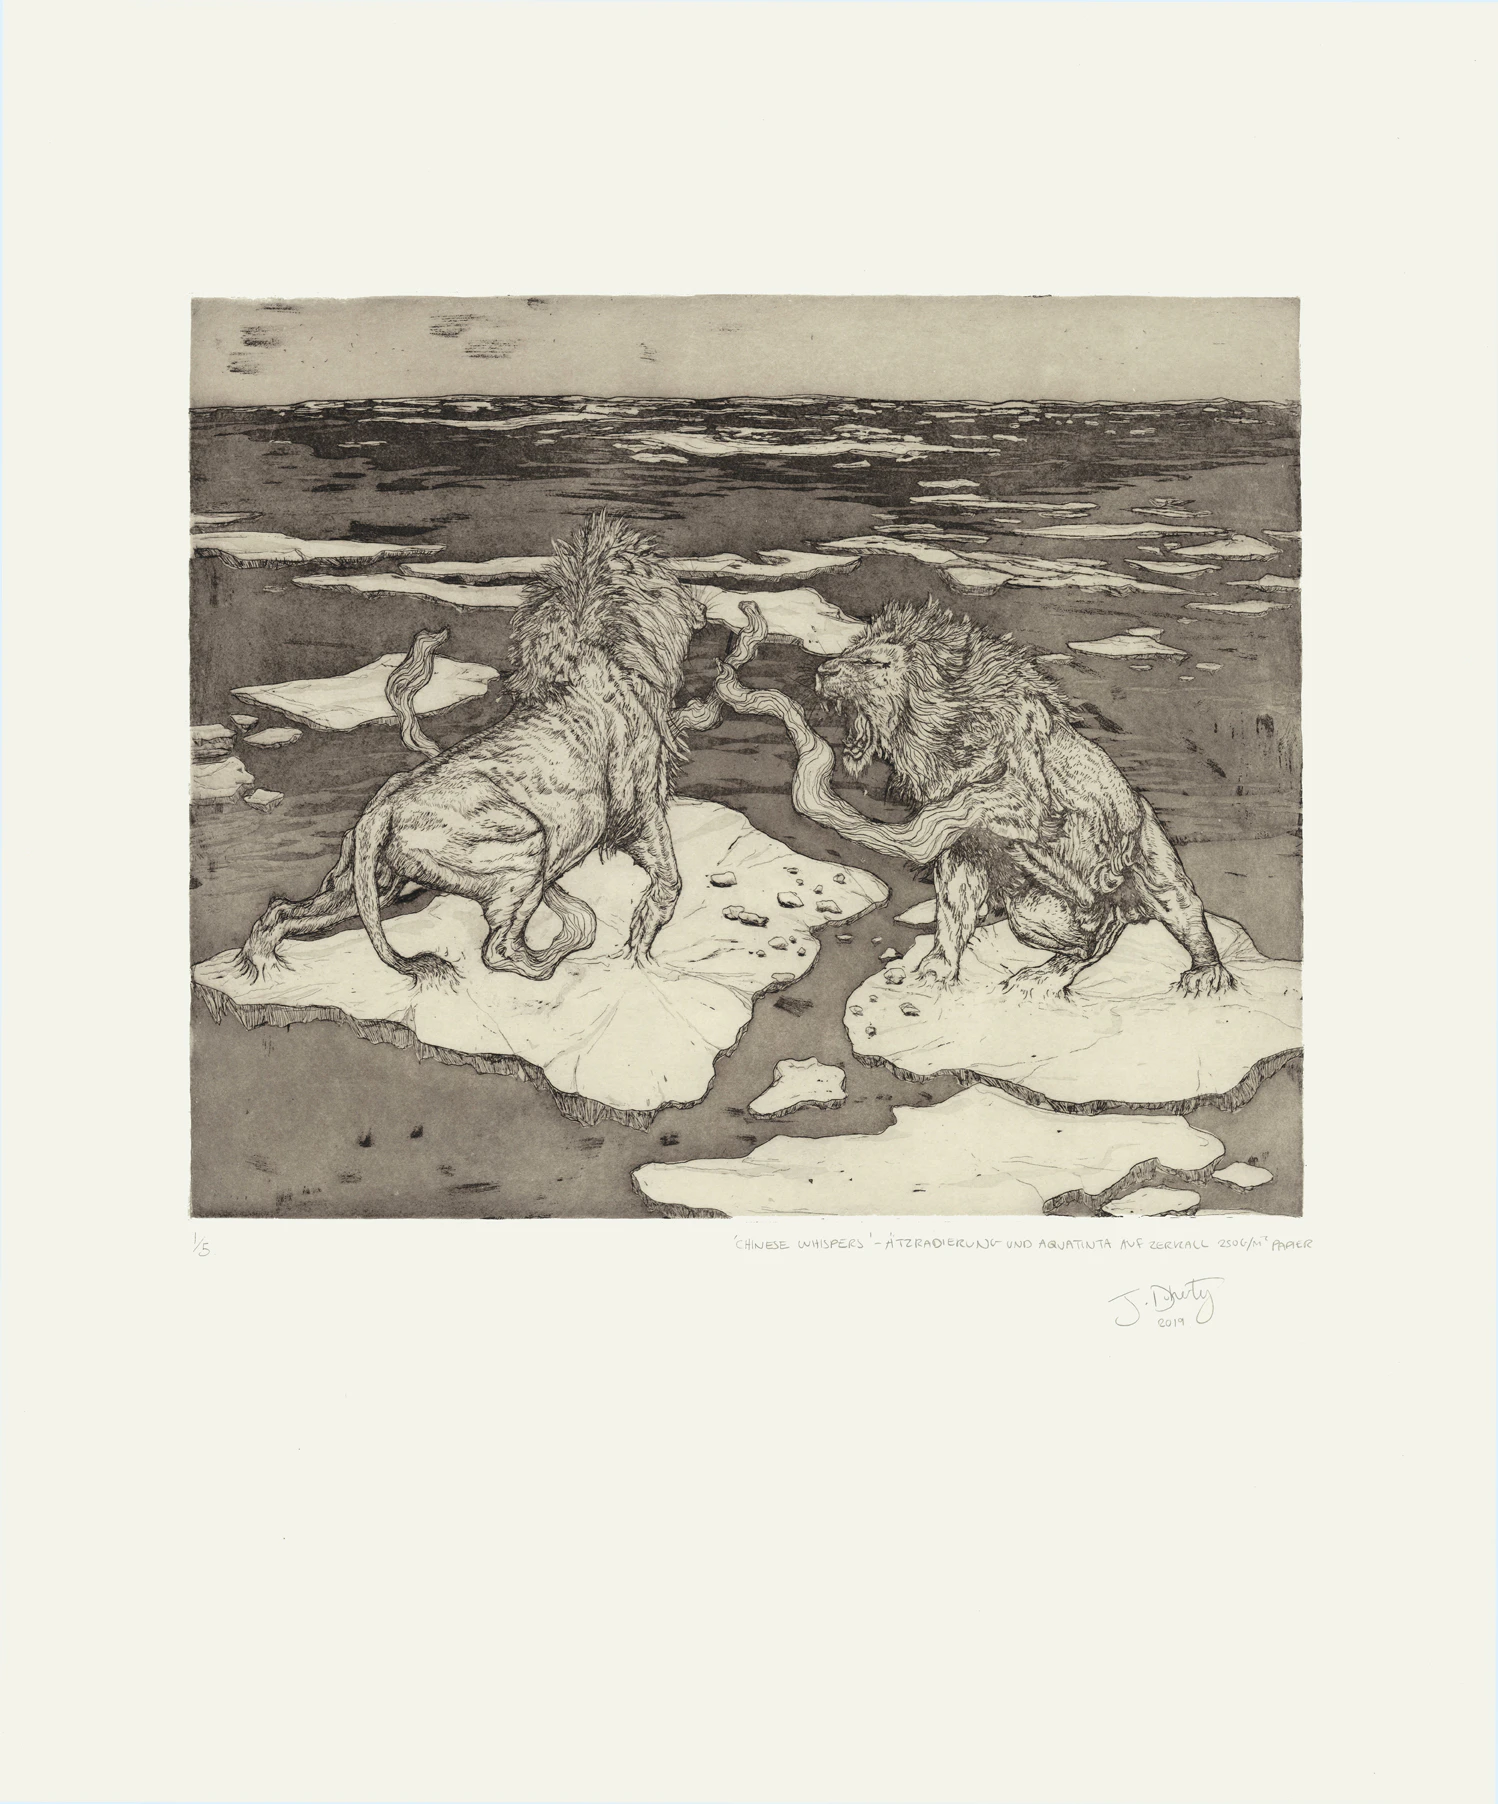 Chinese Whispers, etching on Zerkall 250gsm printing paper, plate 39.5cm x 33cm, paper 68cm x 54cm, edition of 5